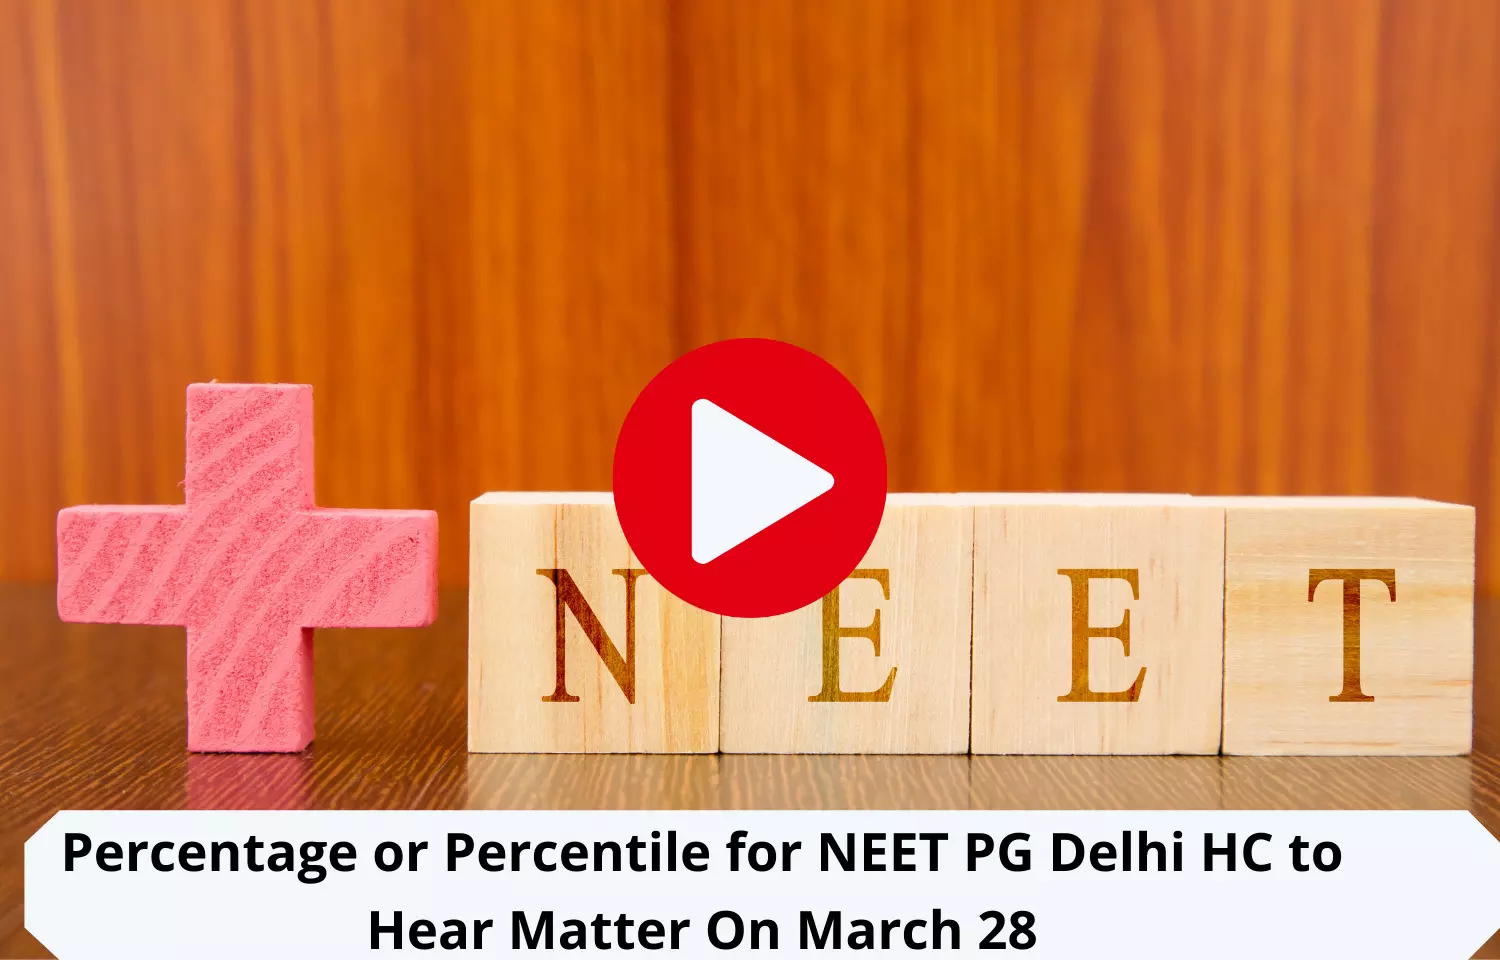 Percentage or Percentile for NEET PG? Delhi HC to hear matter on March 28